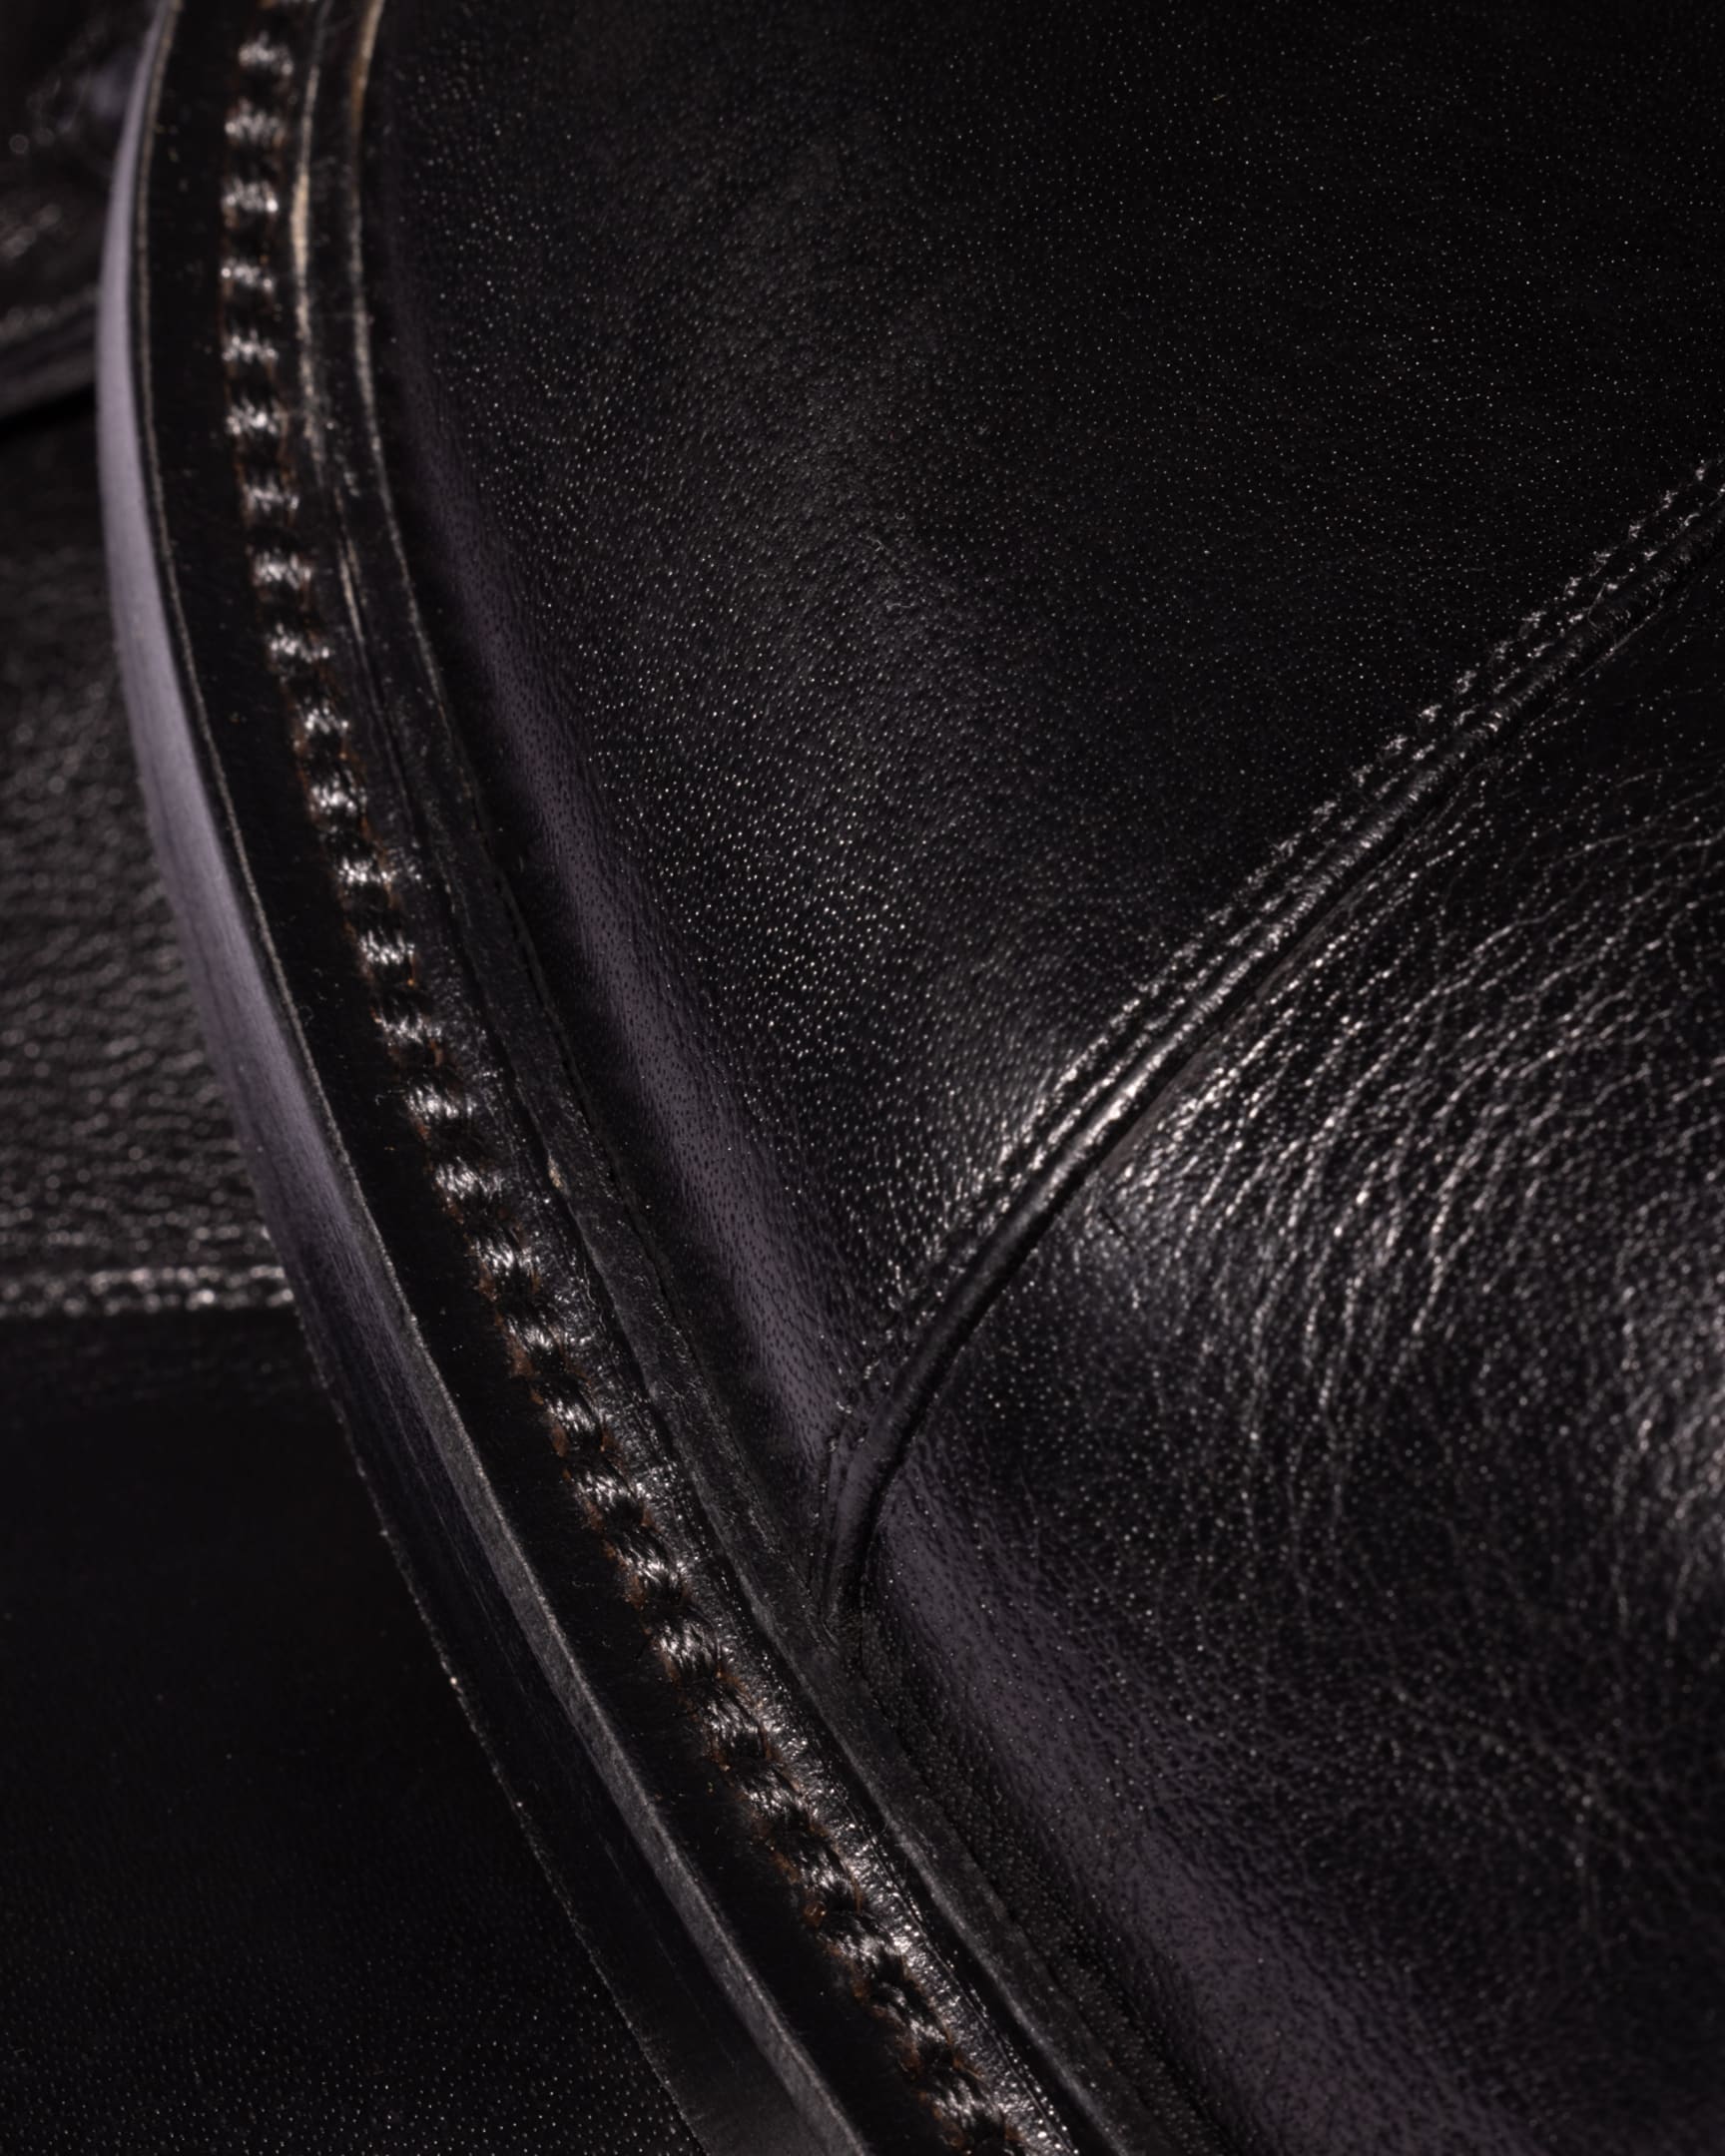 Detail View - Black Leather 'Newland' Boots Paul Smith